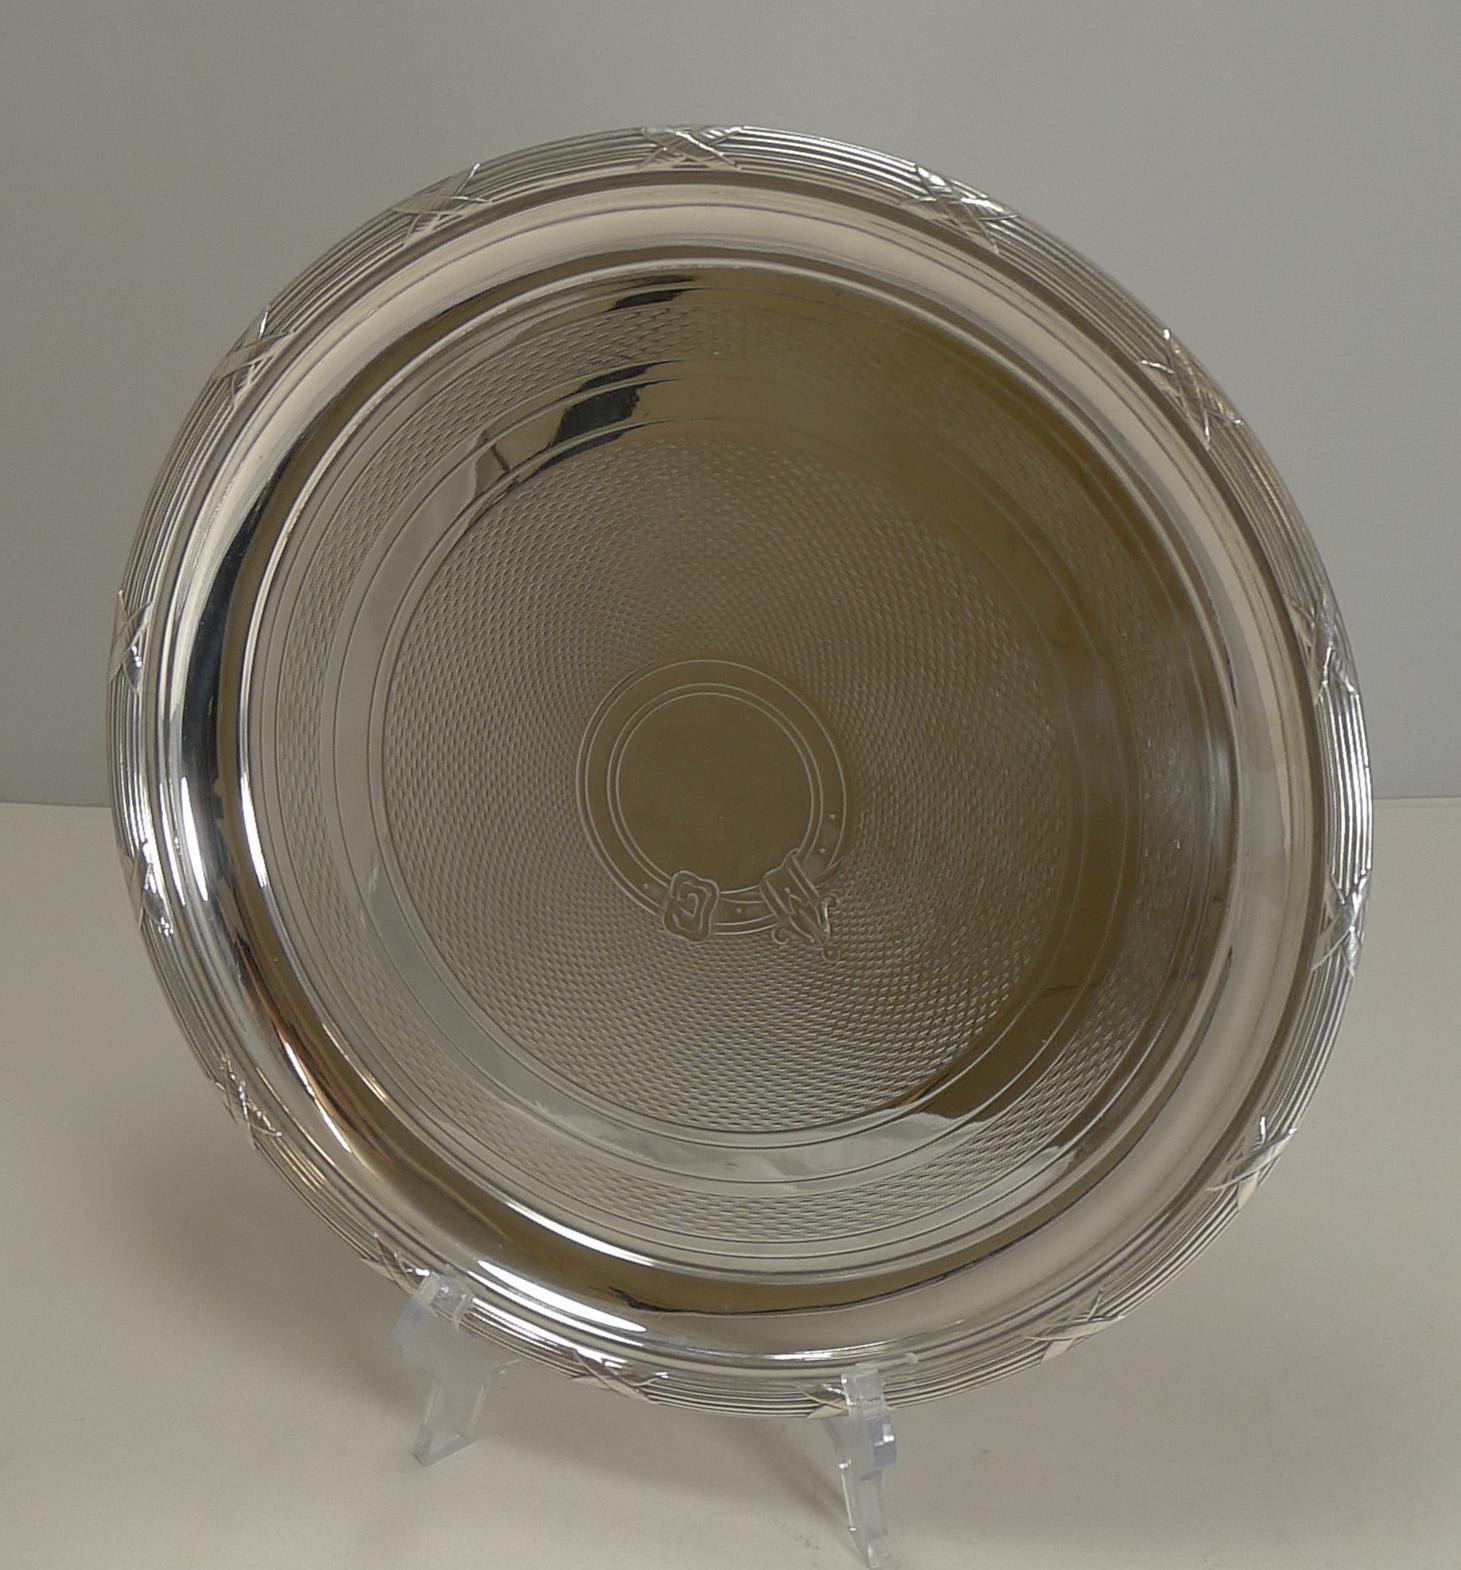 Silver Plate Handsome Antique English Engine Turned Tray / Salver, circa 1890-1900